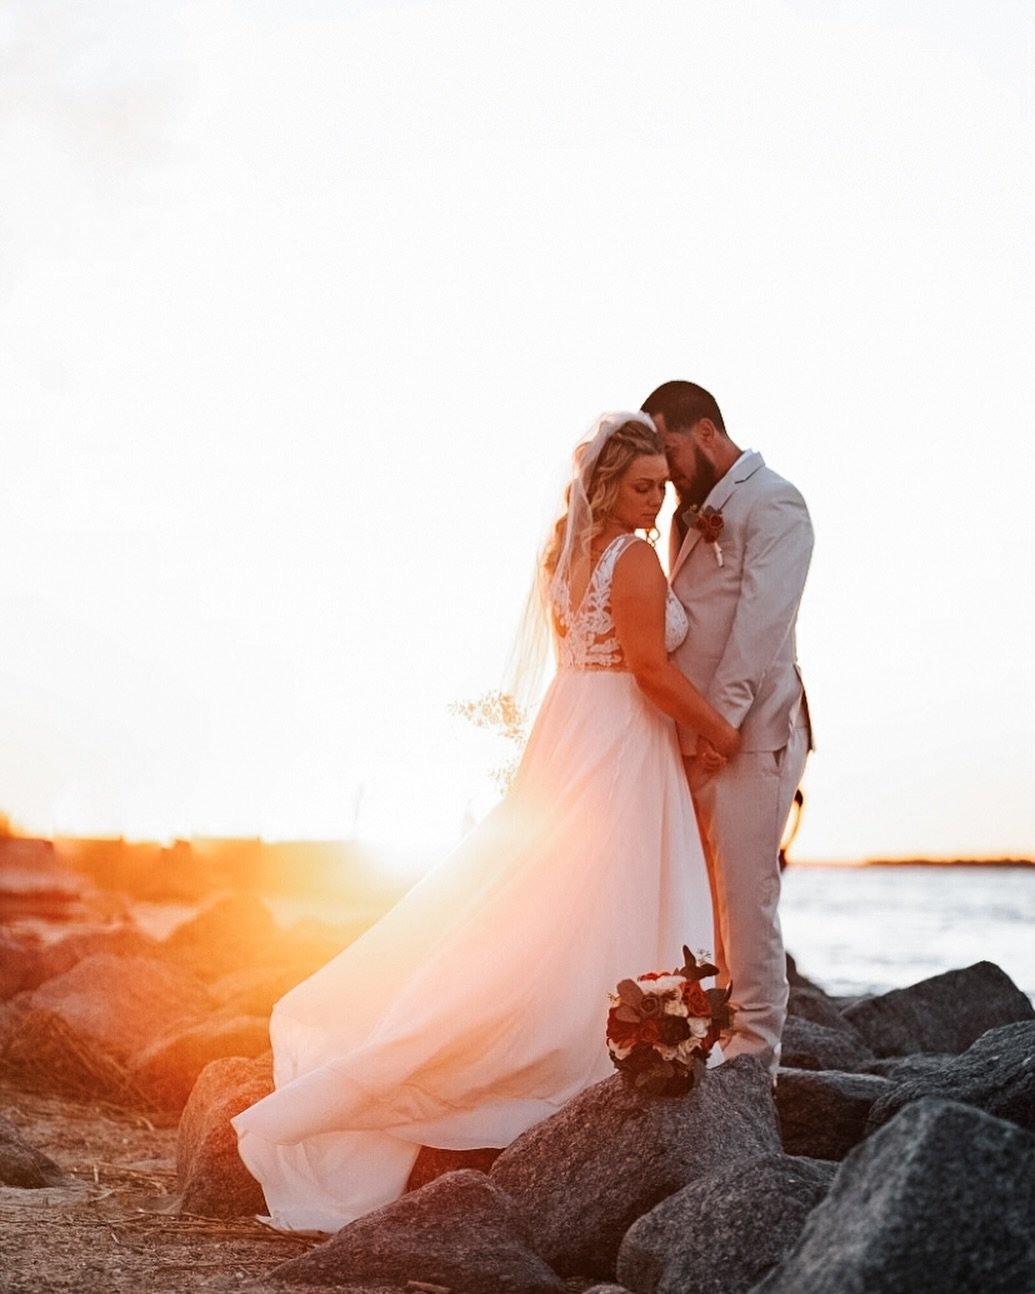 Chasing sunsets and photographing love in its most magical light is what it is all about for us! #daresayweddings #weddingphotography #goldenhour #forevermoments #fortclinchstatepark #worldsbestweddingphotos